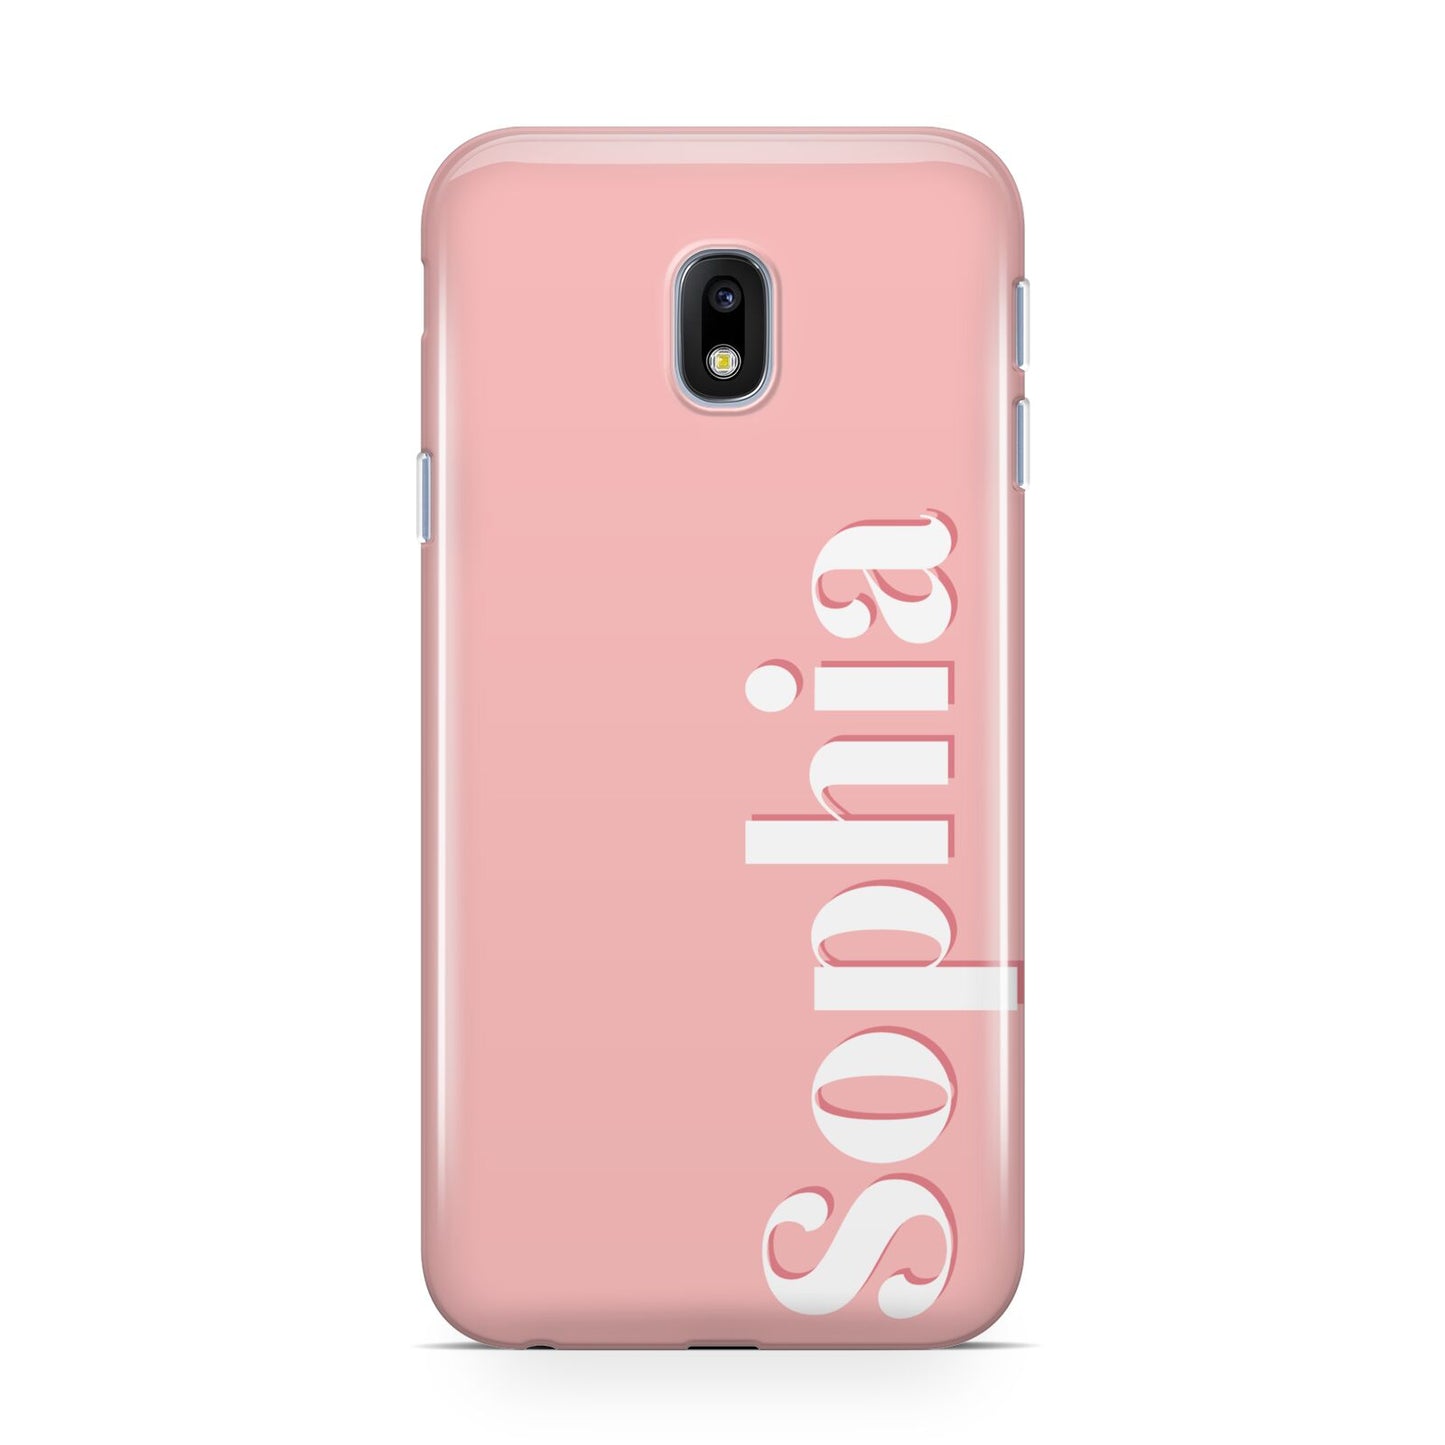 Personalised Pink Text Samsung Galaxy J3 2017 Case